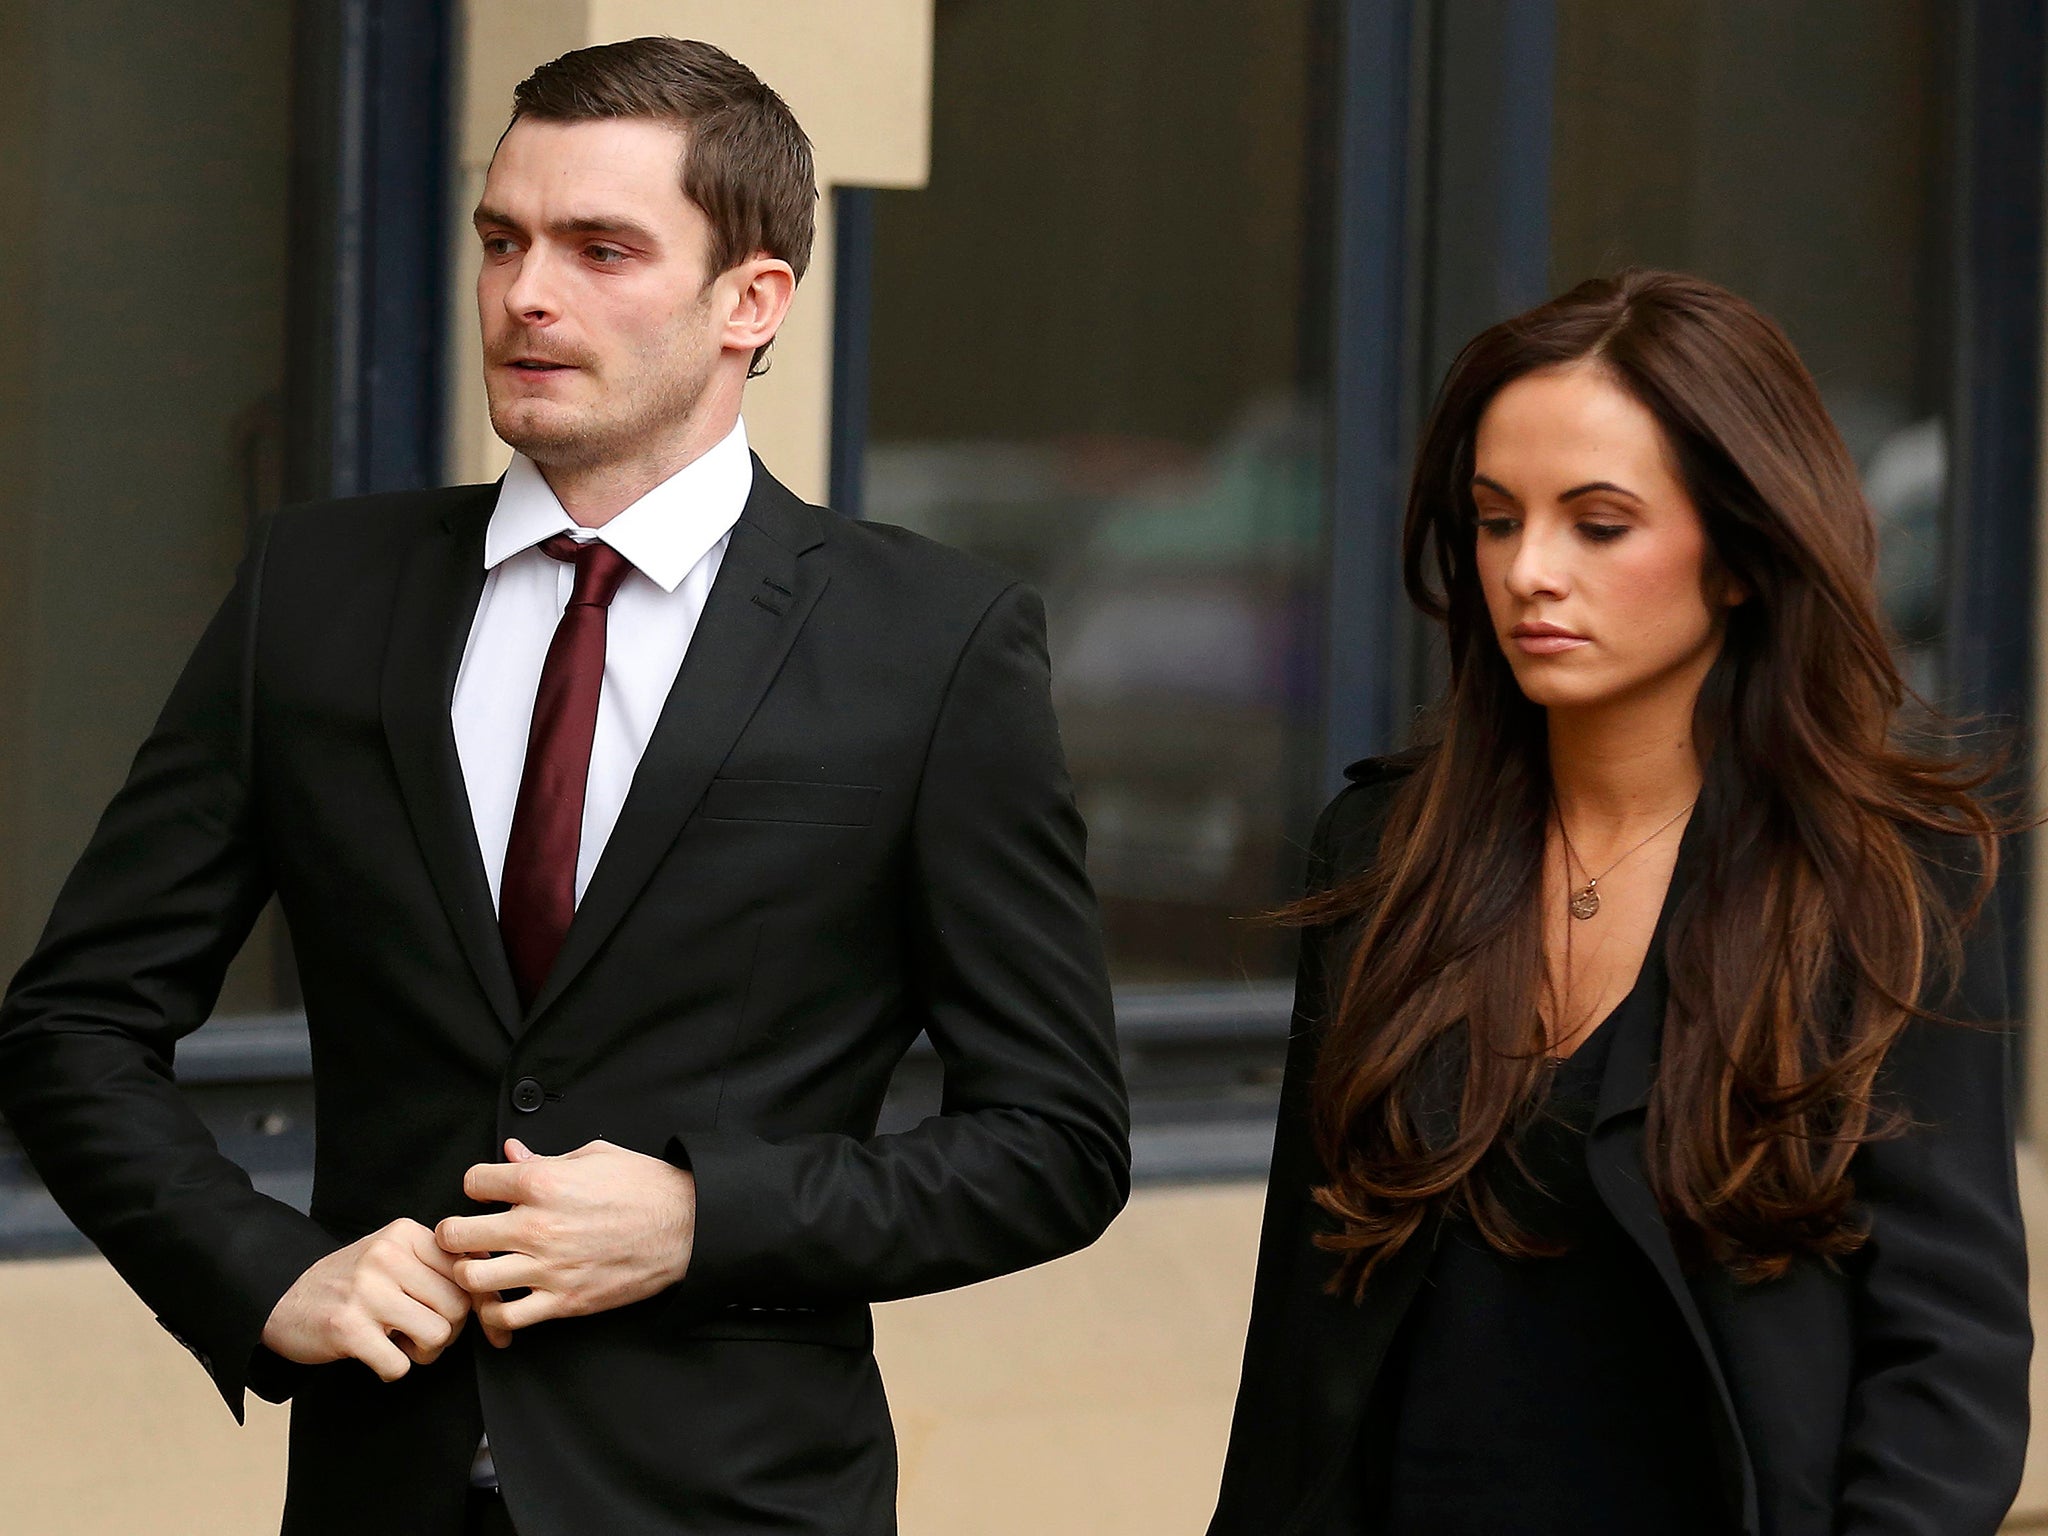 Former Sunderland soccer player Adam Johnson arrives with his girlfriend Stacey Flounders at Bradford Crown Court in Bradford,